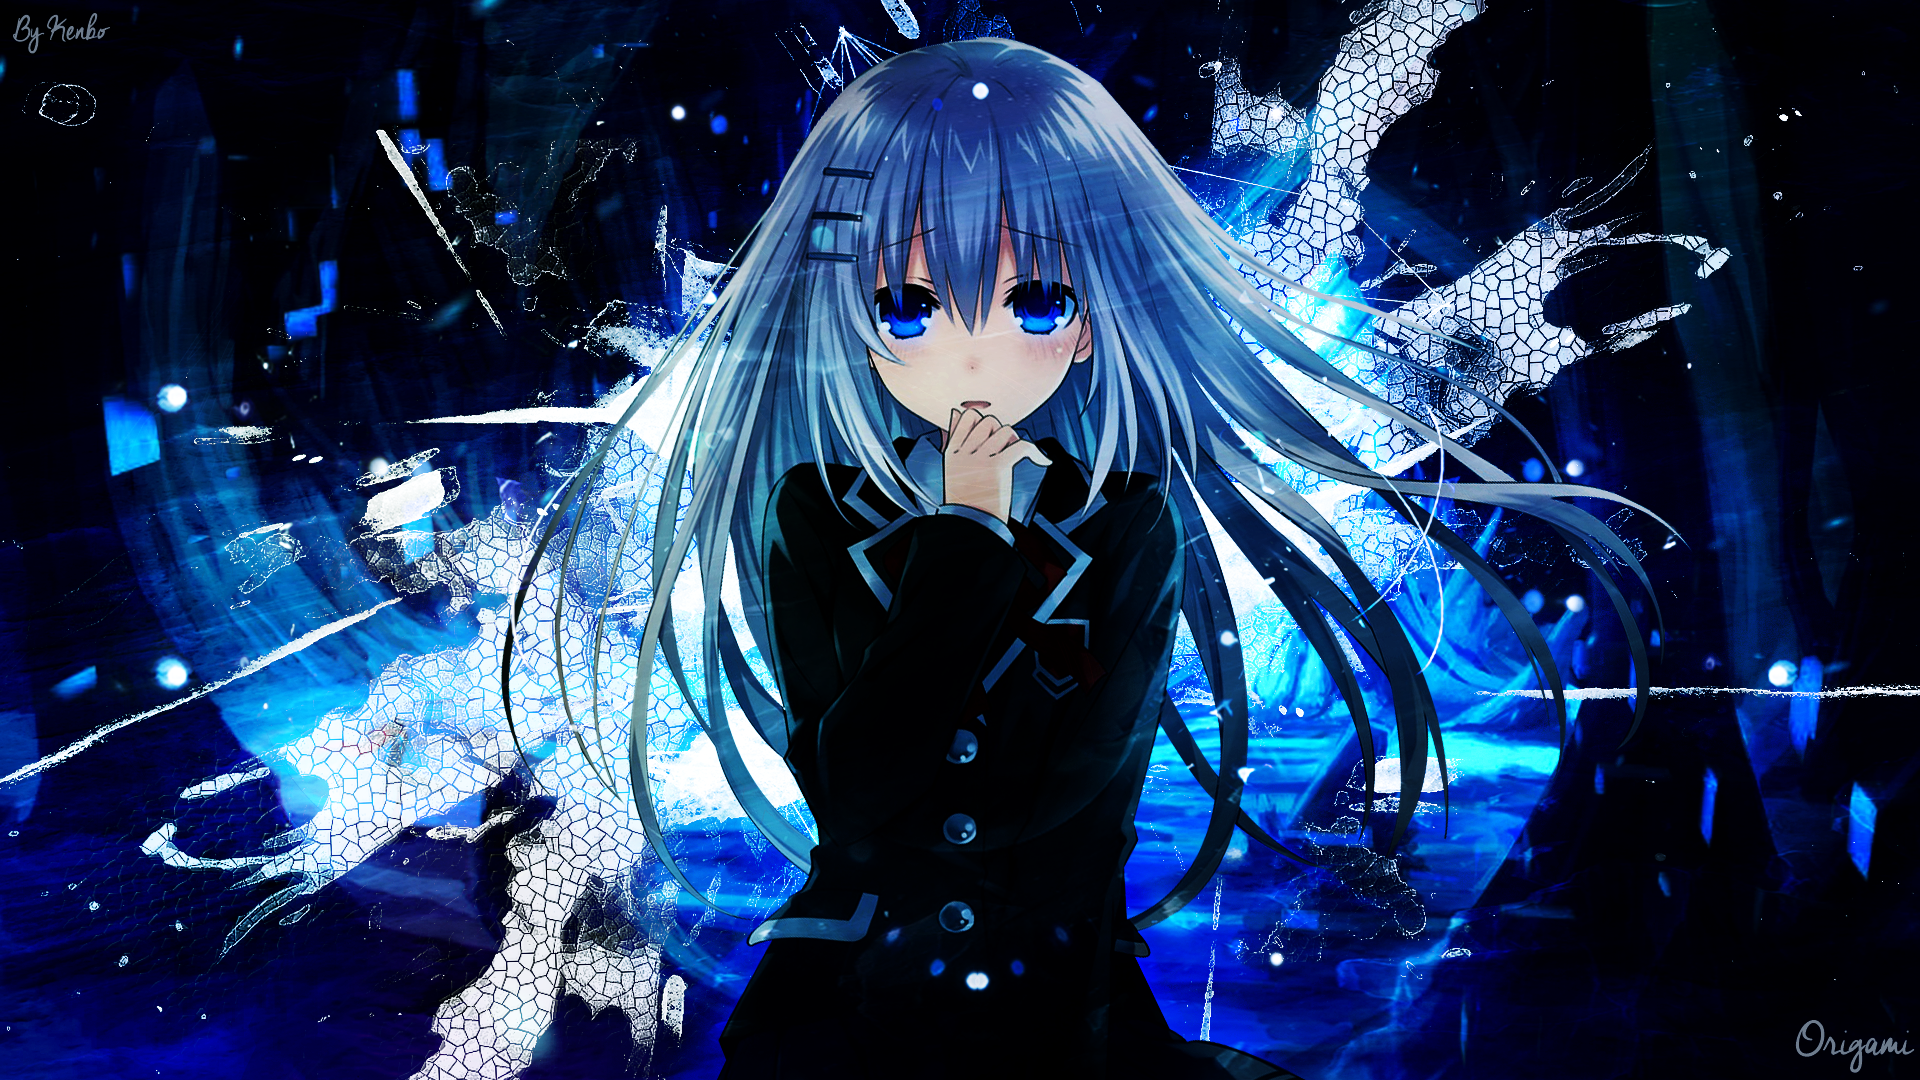 Anime 1920x1080 anime anime girls blue eyes Tobiichi Origami picture-in-picture Date A Live